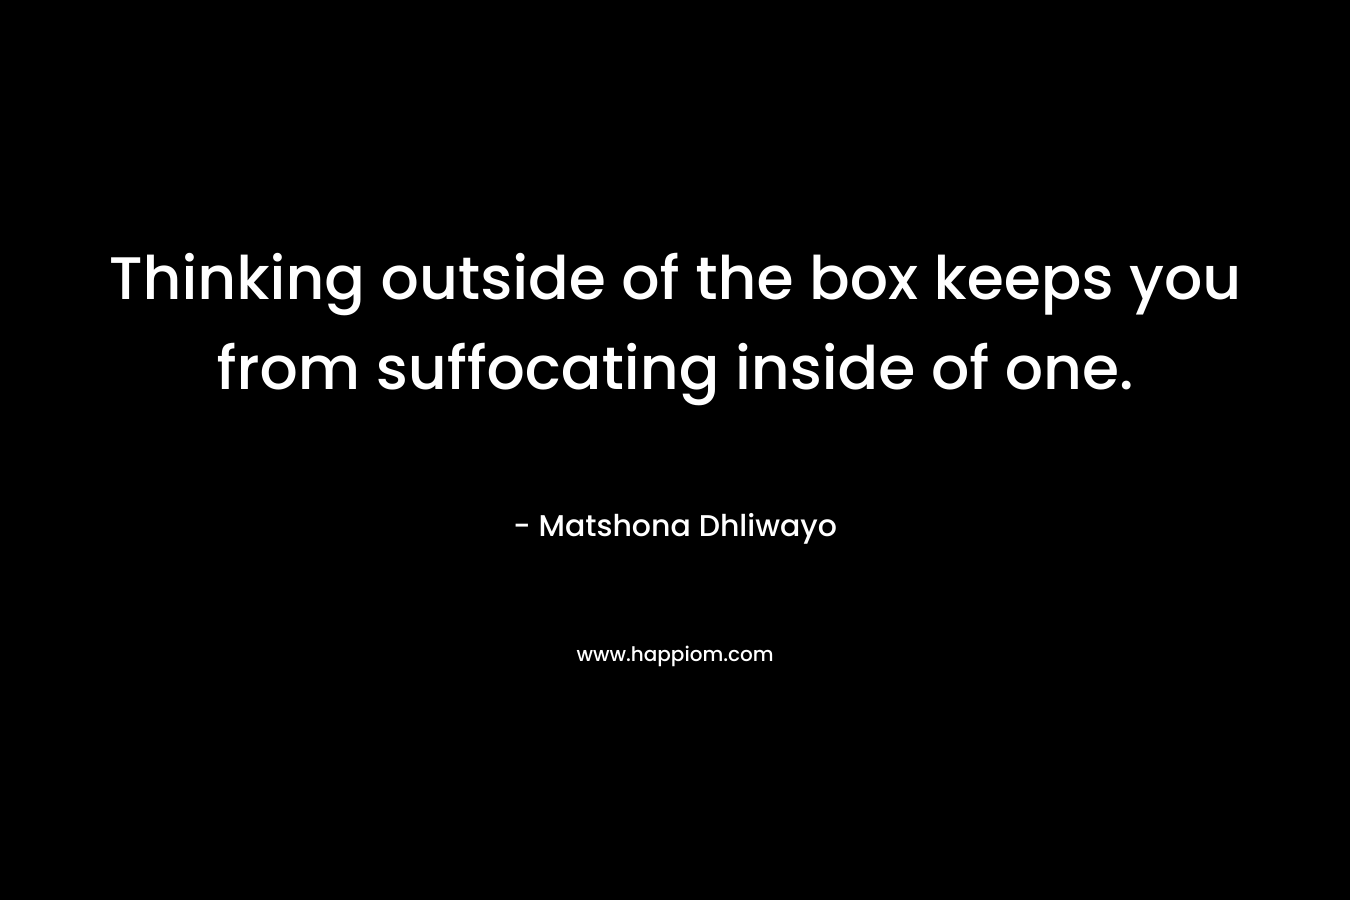 Thinking outside of the box keeps you from suffocating inside of one. – Matshona Dhliwayo